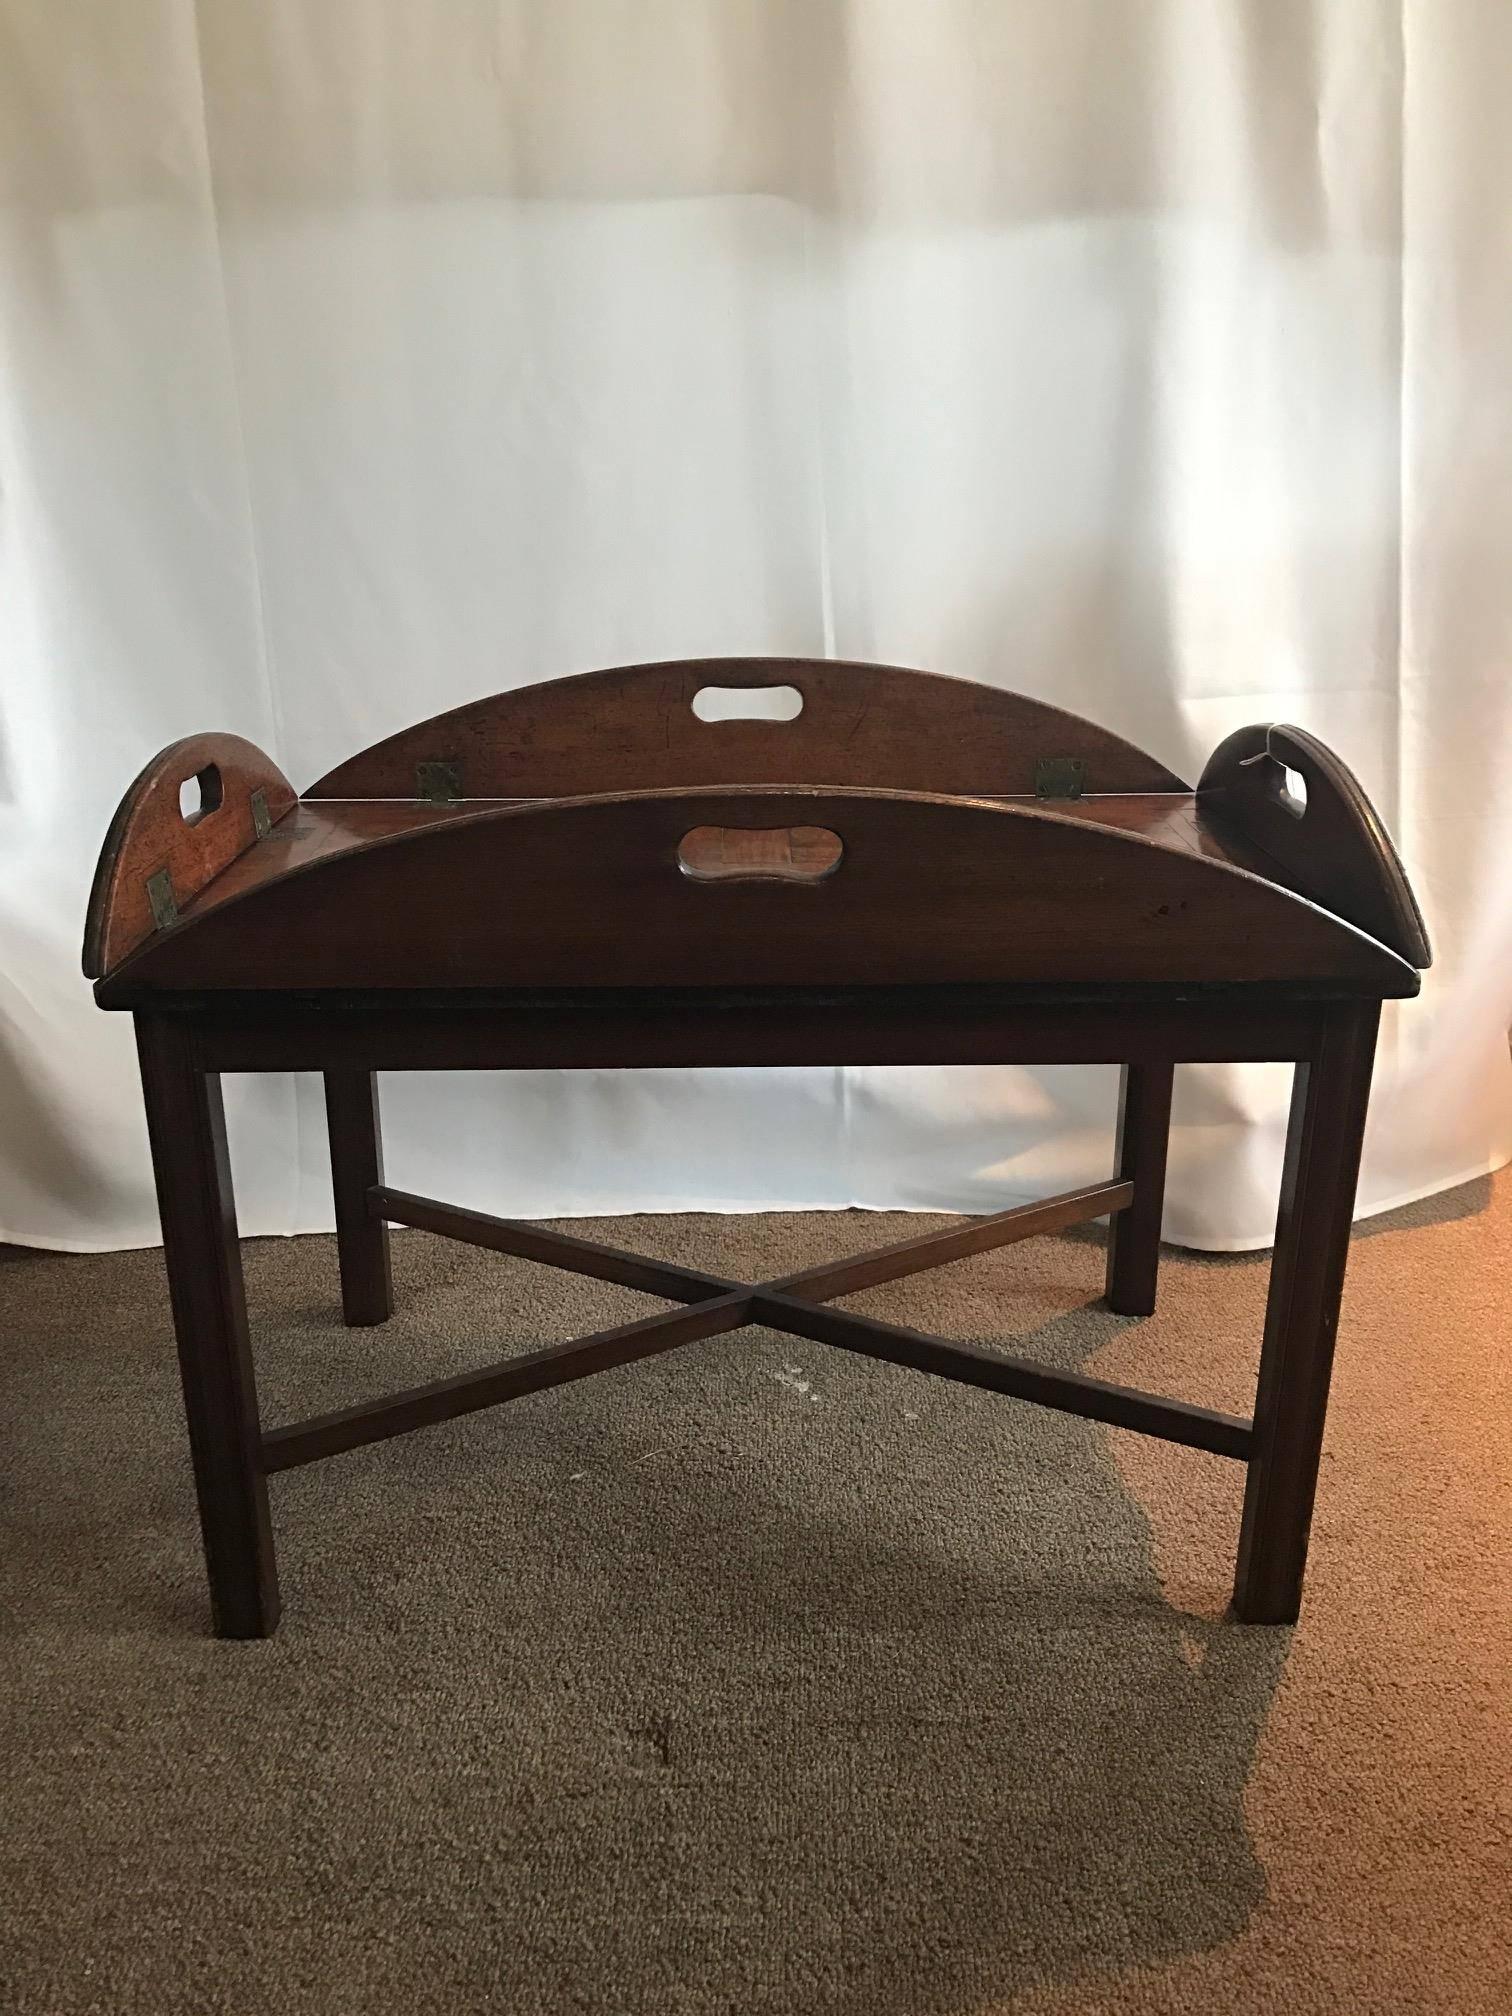 Chippendale antique period mahogany butler's tray table, English, circa 1765. Beautiful condition for age - This piece is exquisite in detail and form. Rectangular center and hinged leaves with oval shaped open handles. Simply stunning.